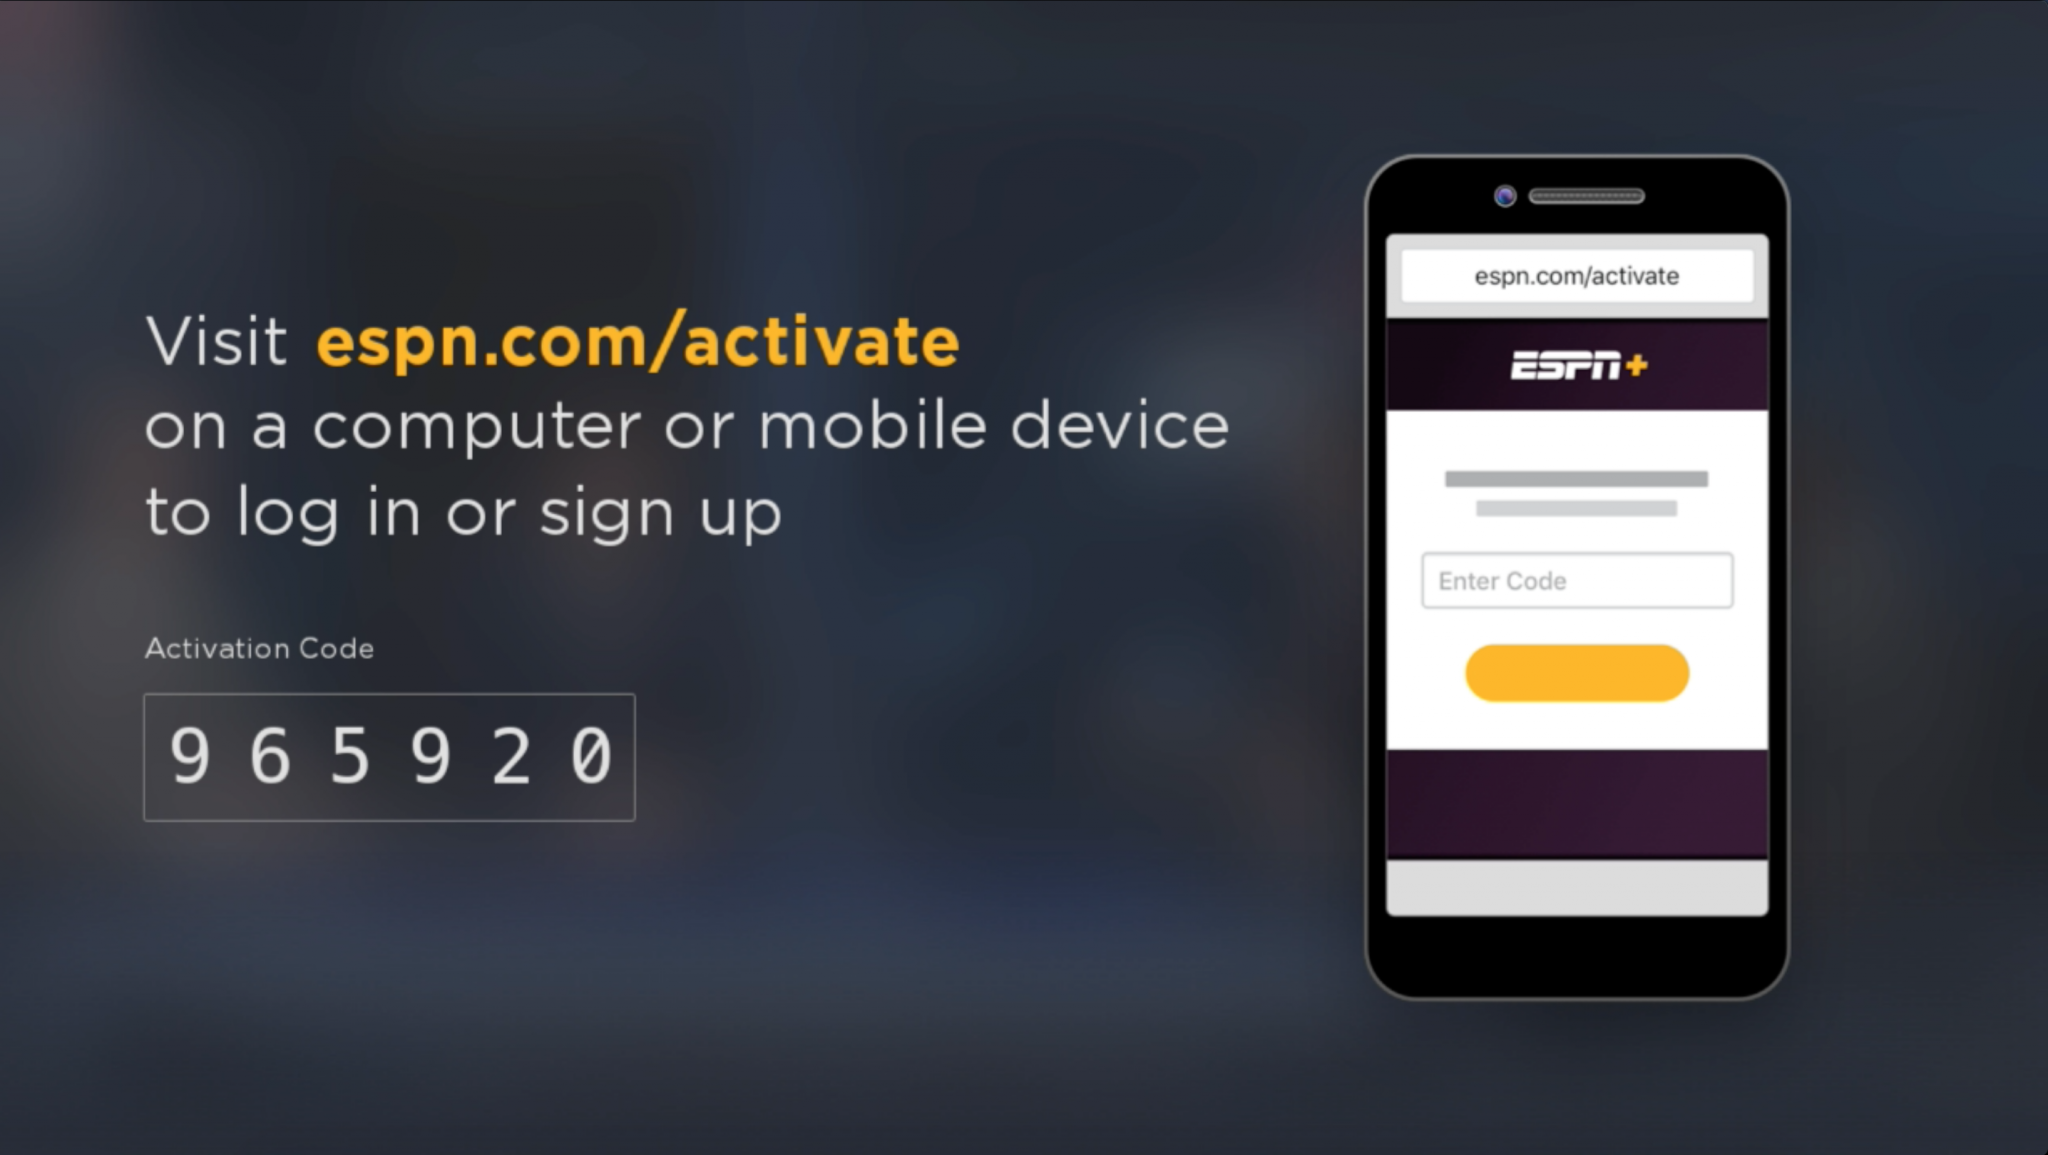 Espn com activate How to use the activation code on